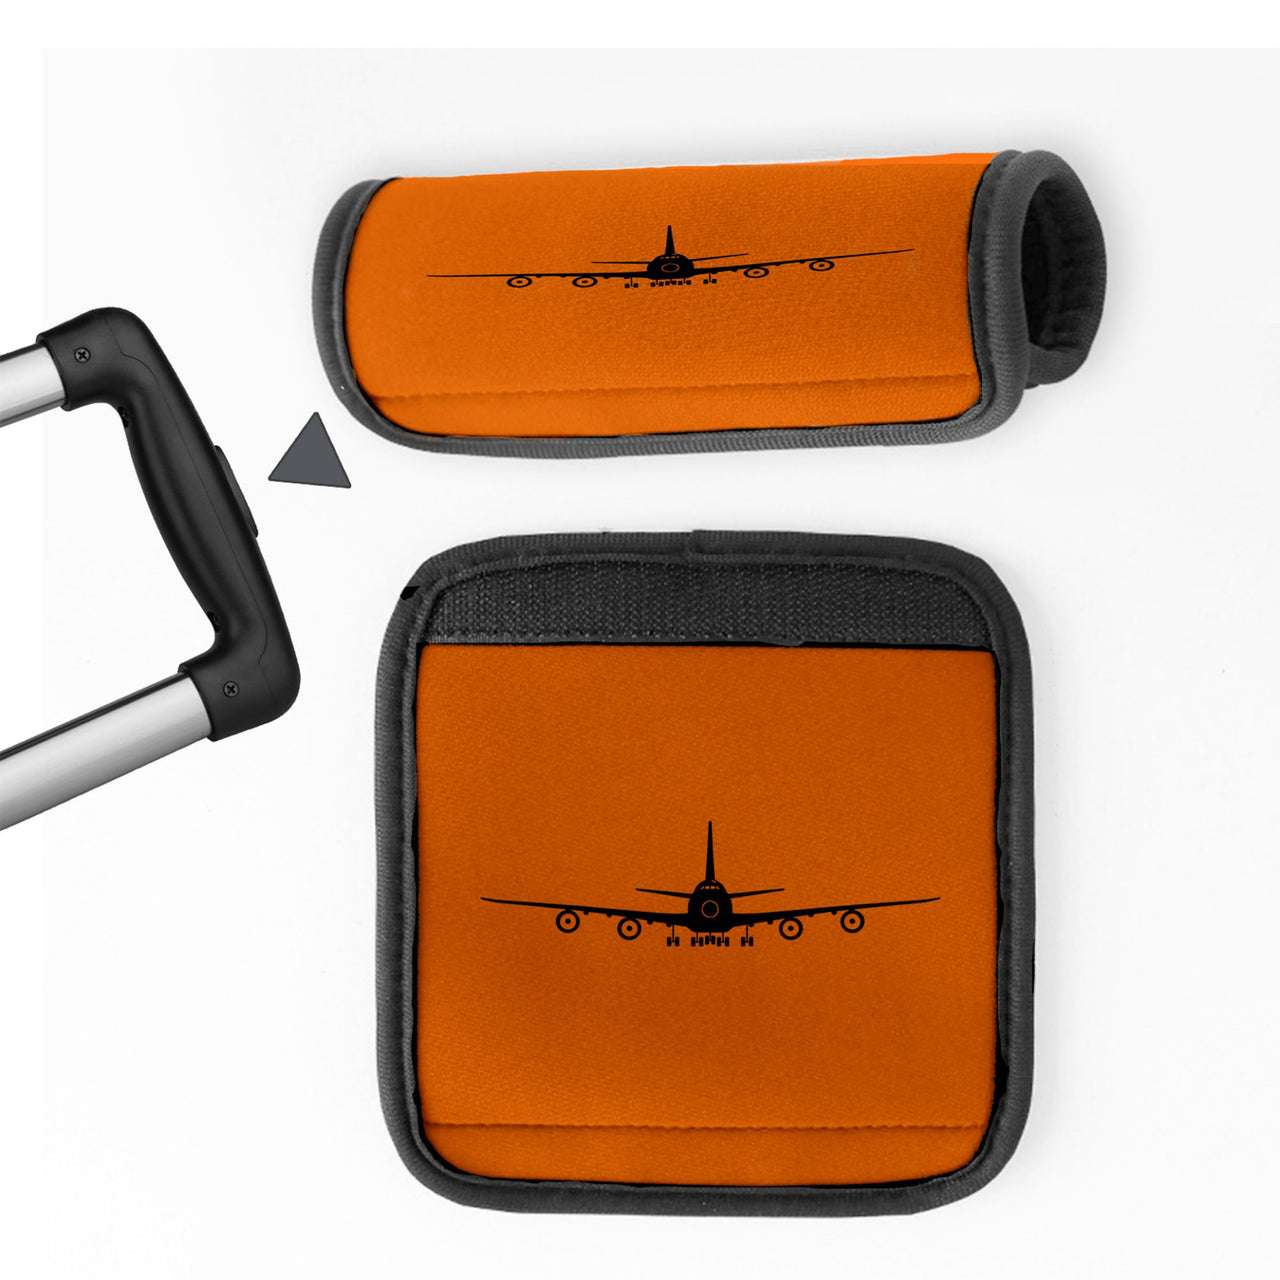 Boeing 747 Silhouette Designed Neoprene Luggage Handle Covers